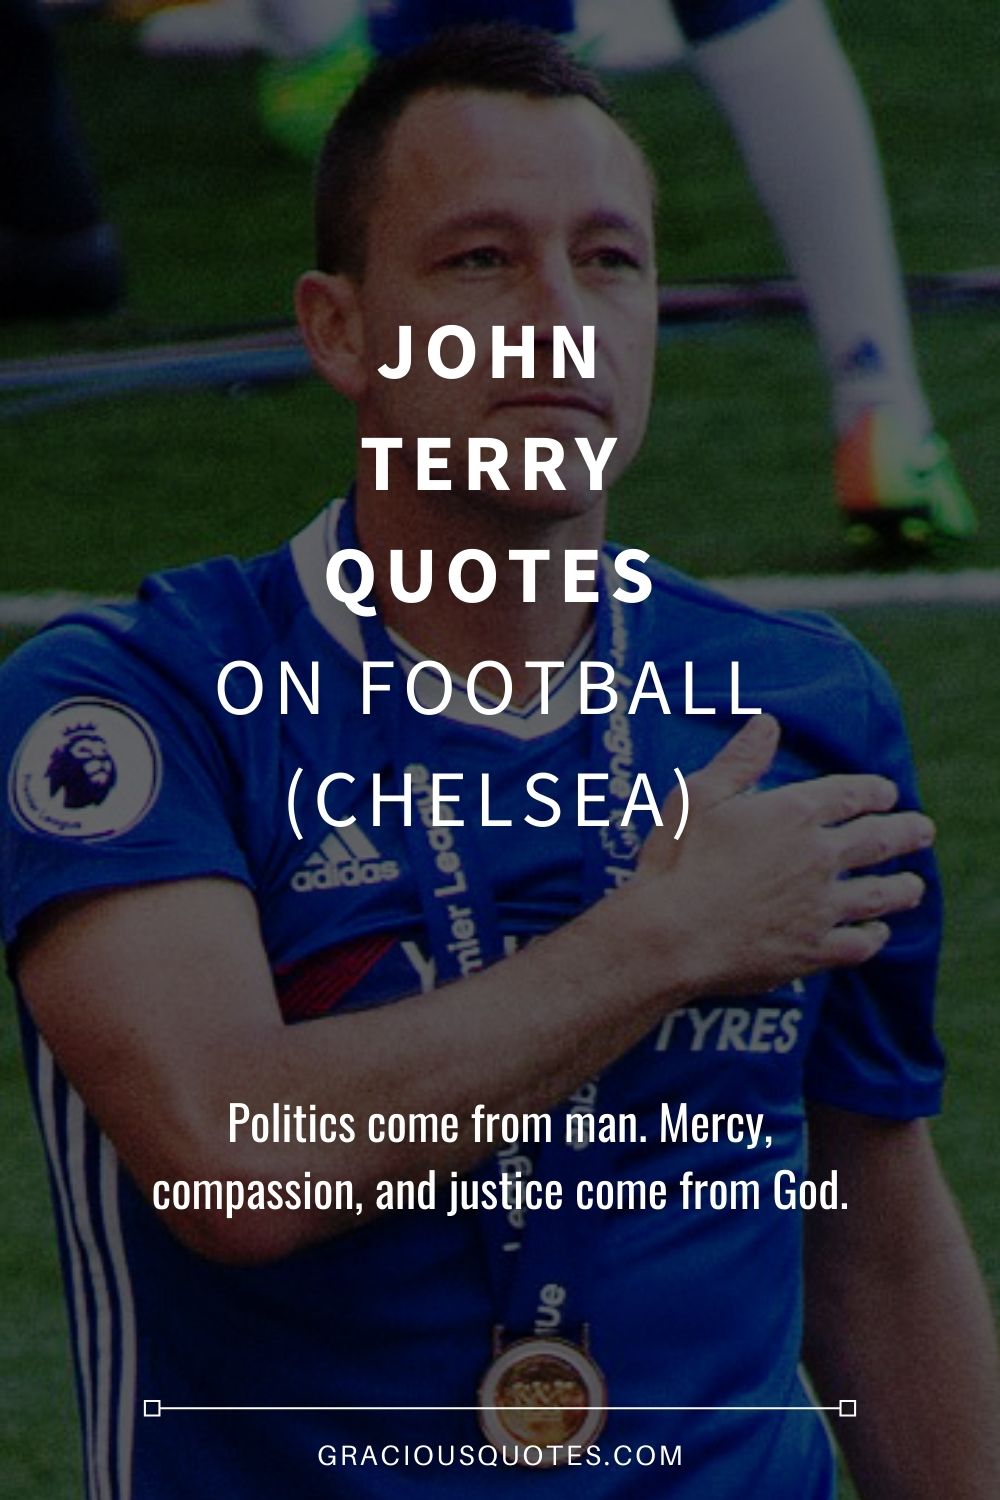 John Terry Quotes on Football (CHELSEA) - Gracious Quotes